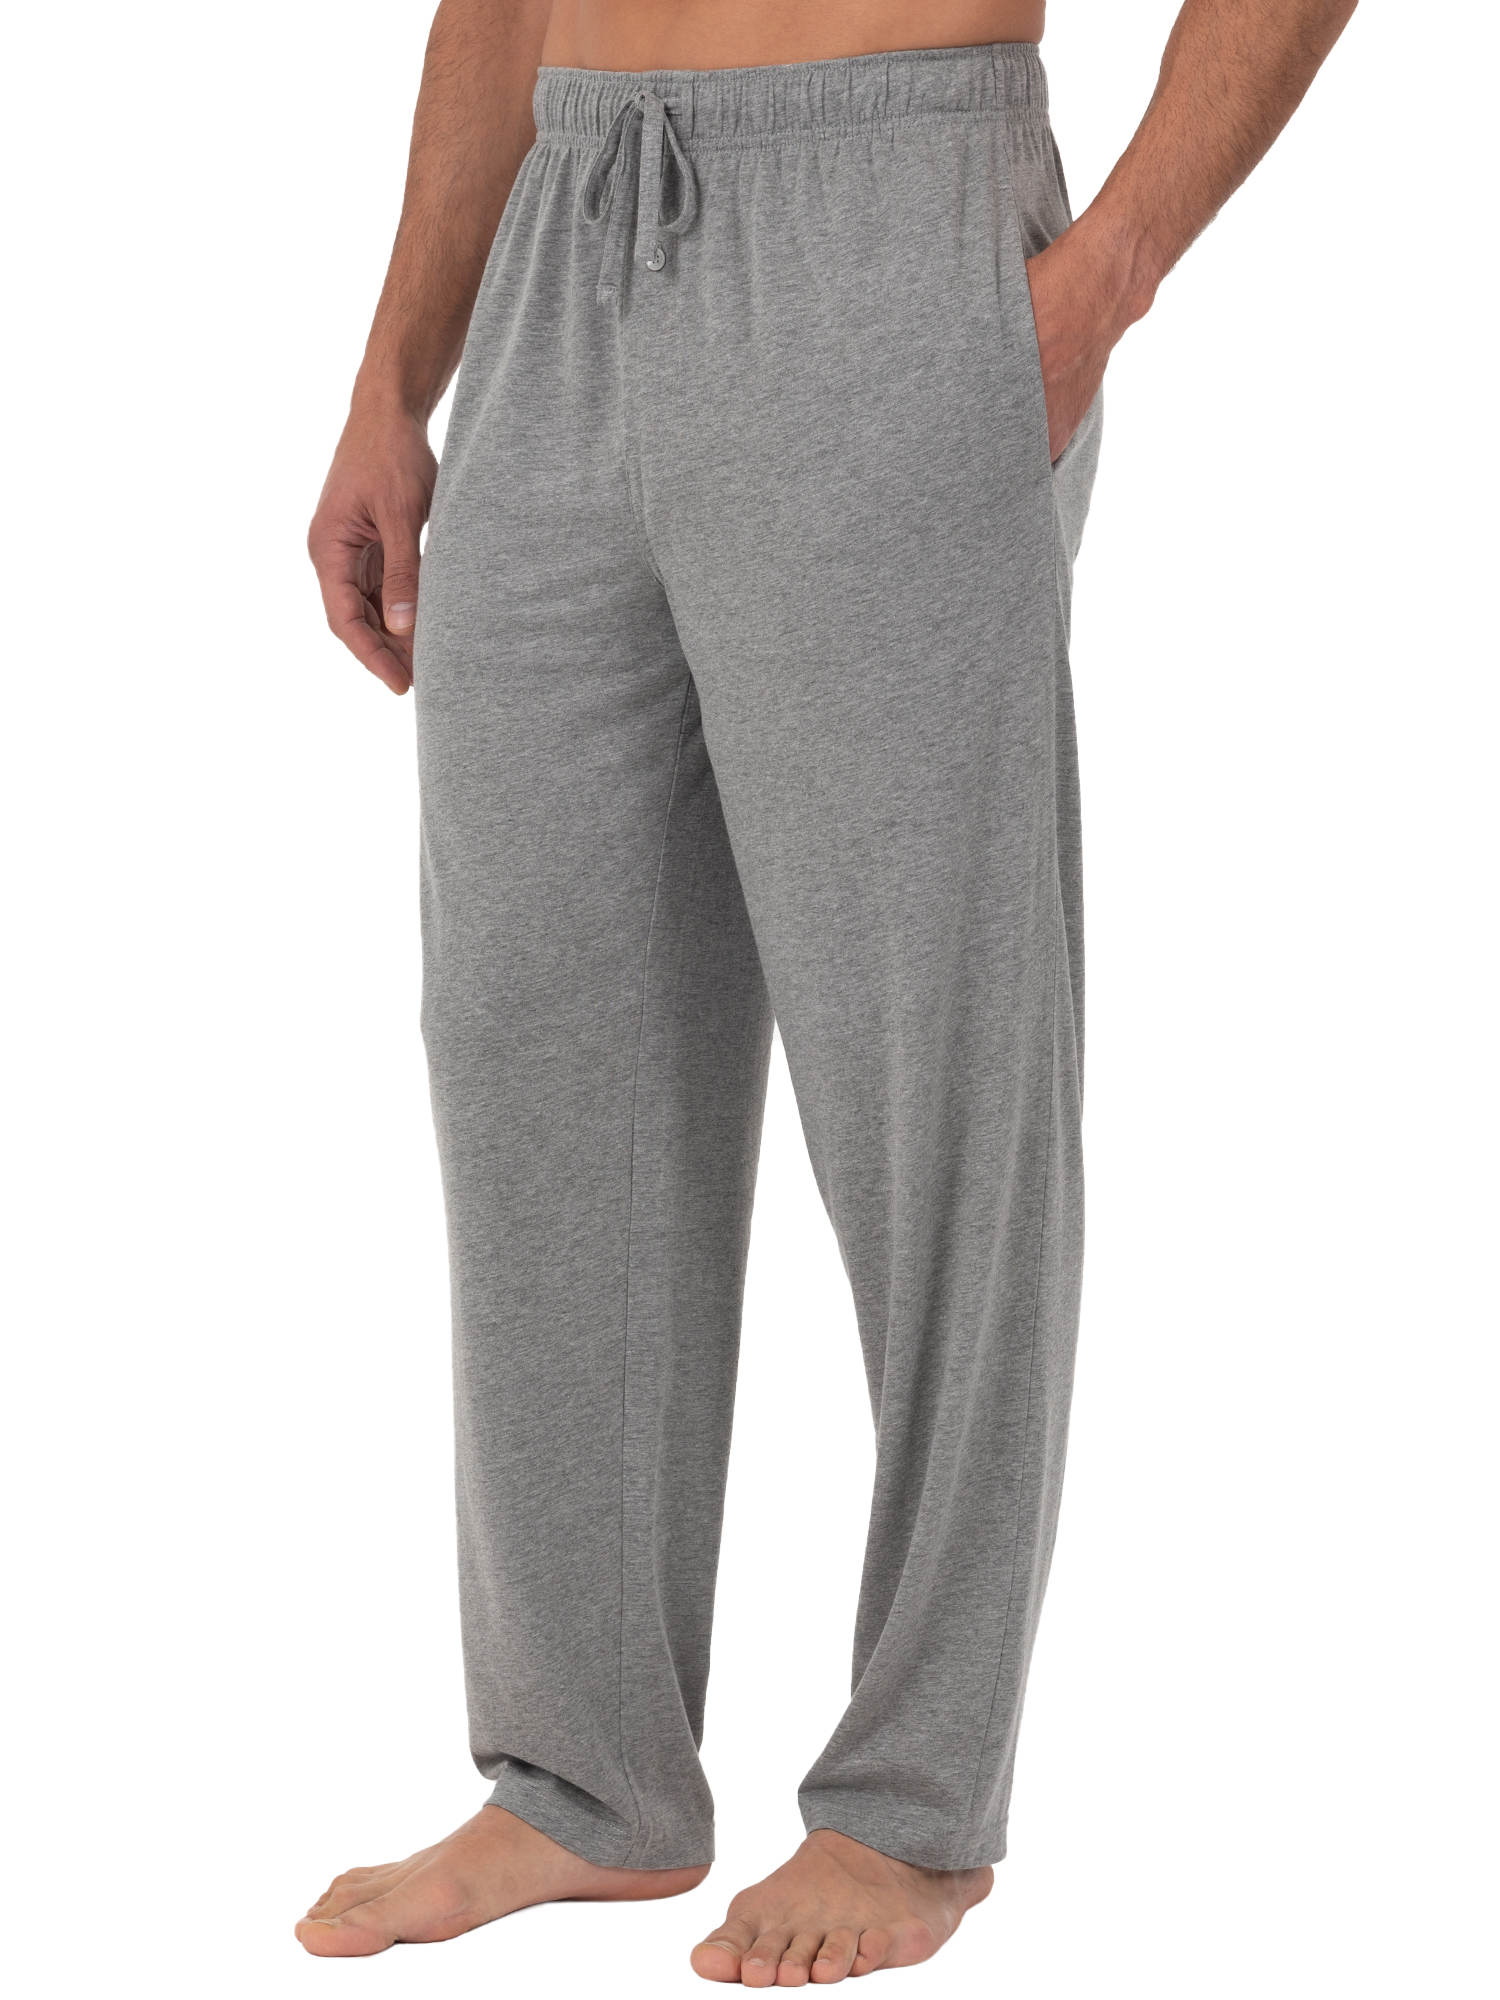 Fruit of the Loom Men's and Big Men's Jersey Knit Pajama Pants, Sizes S-6XL - image 9 of 9